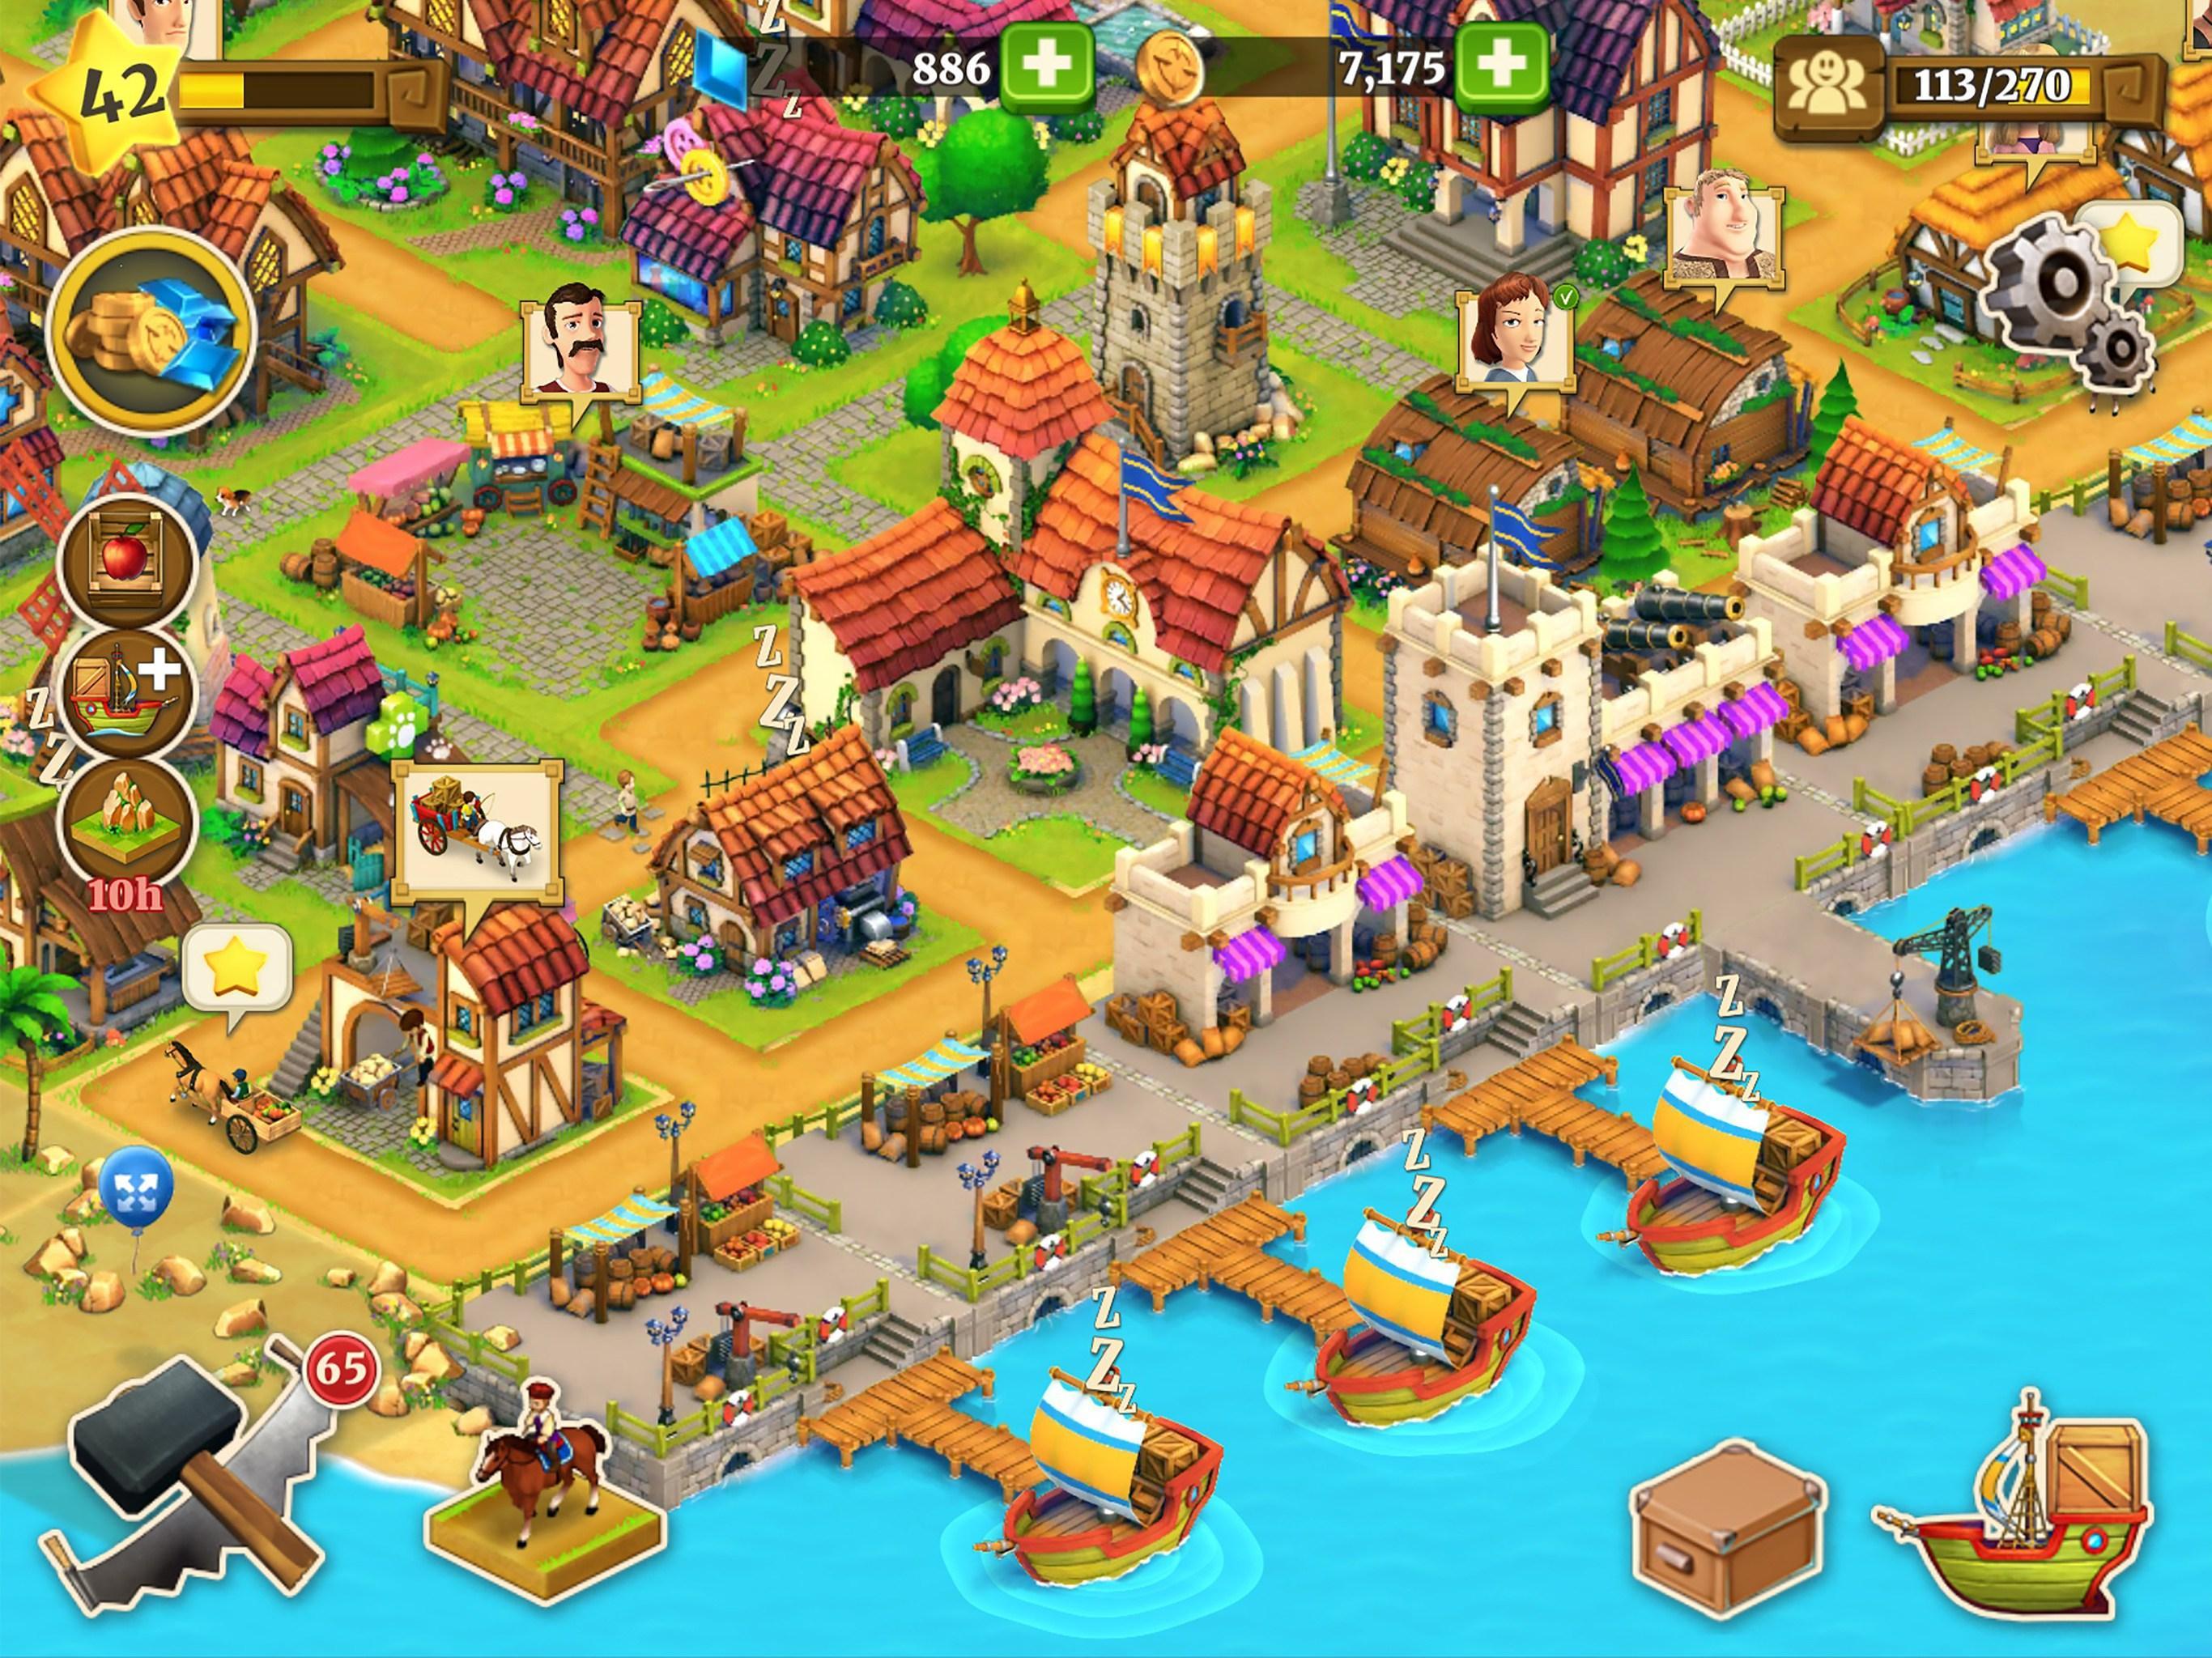 What your city town or village is. Игра Farm Town. Игра Village Farm 2. Village Town игра. Фермы фарм Таун.